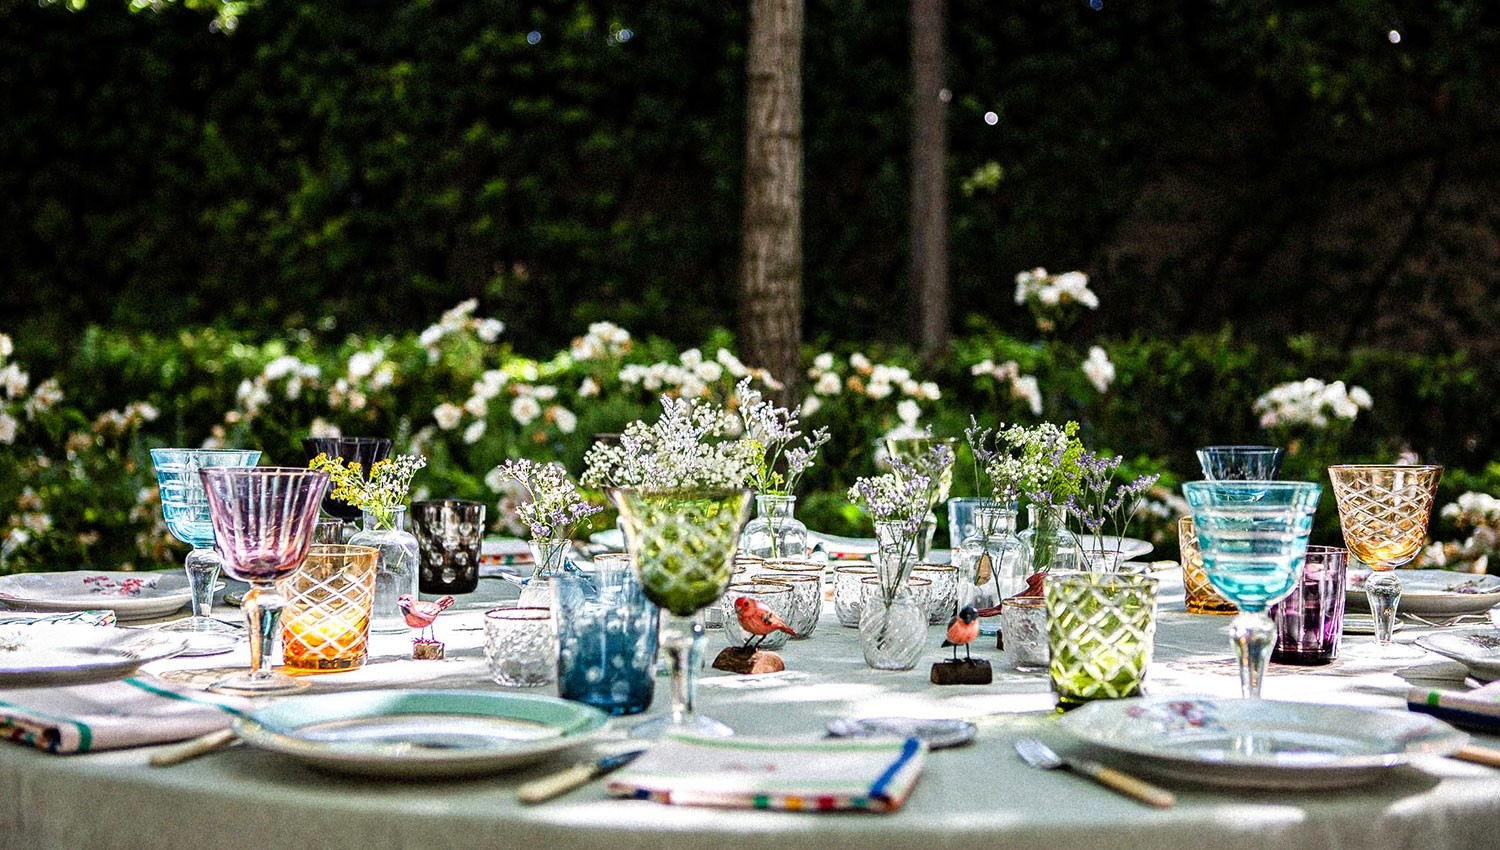 Outdoor table decorated with flowers and tableware.